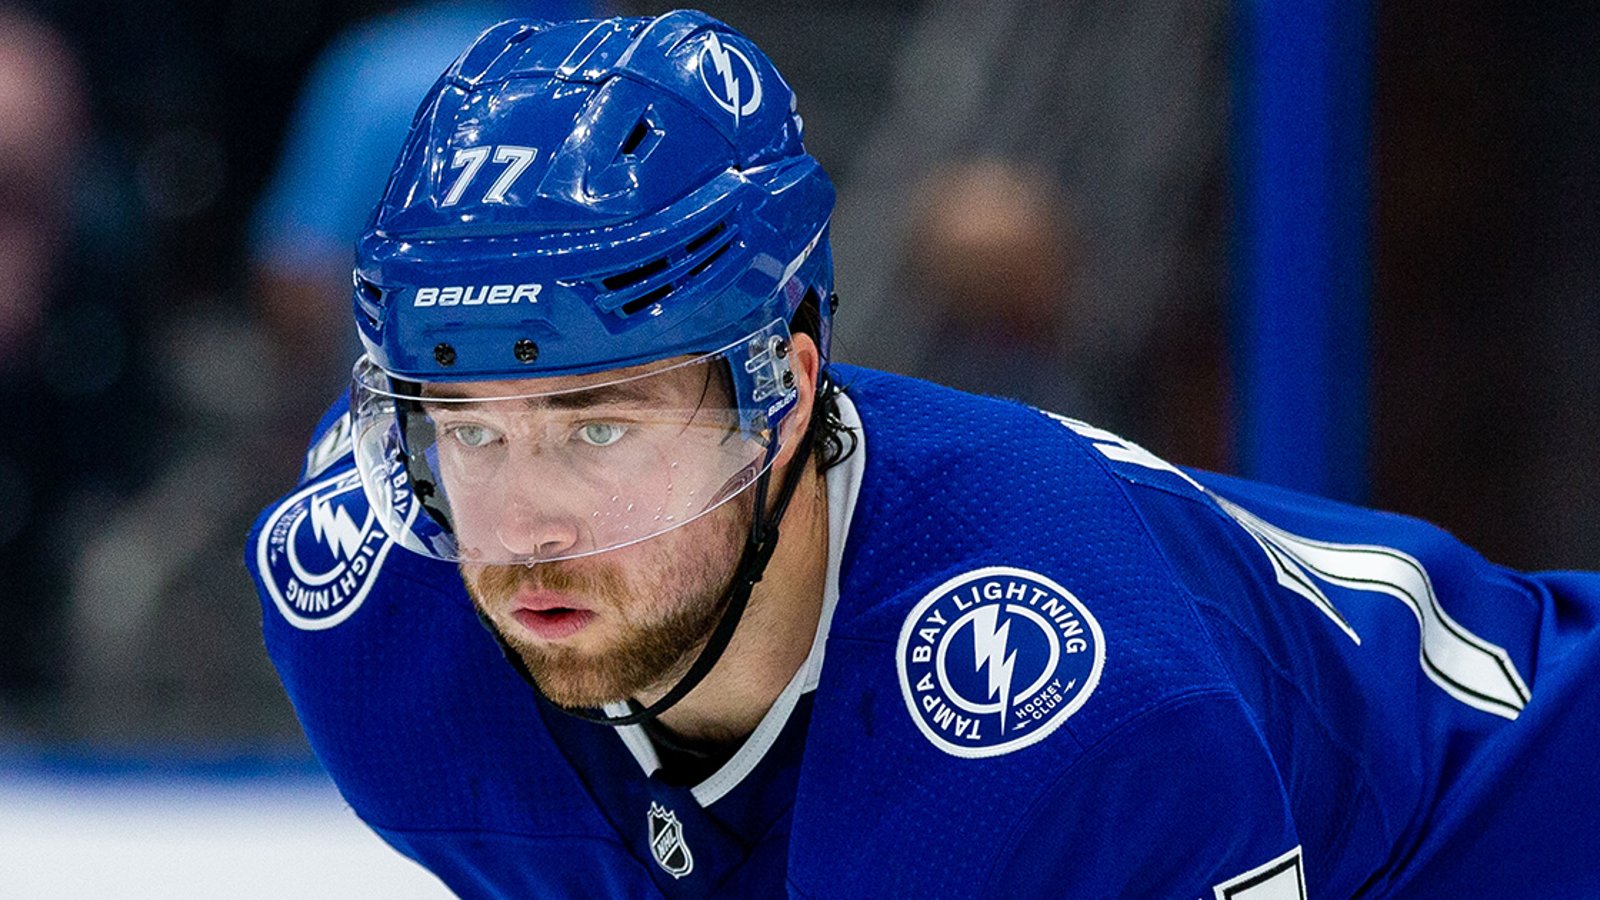 Hedman throws shade at Marner ahead of tonight’s game